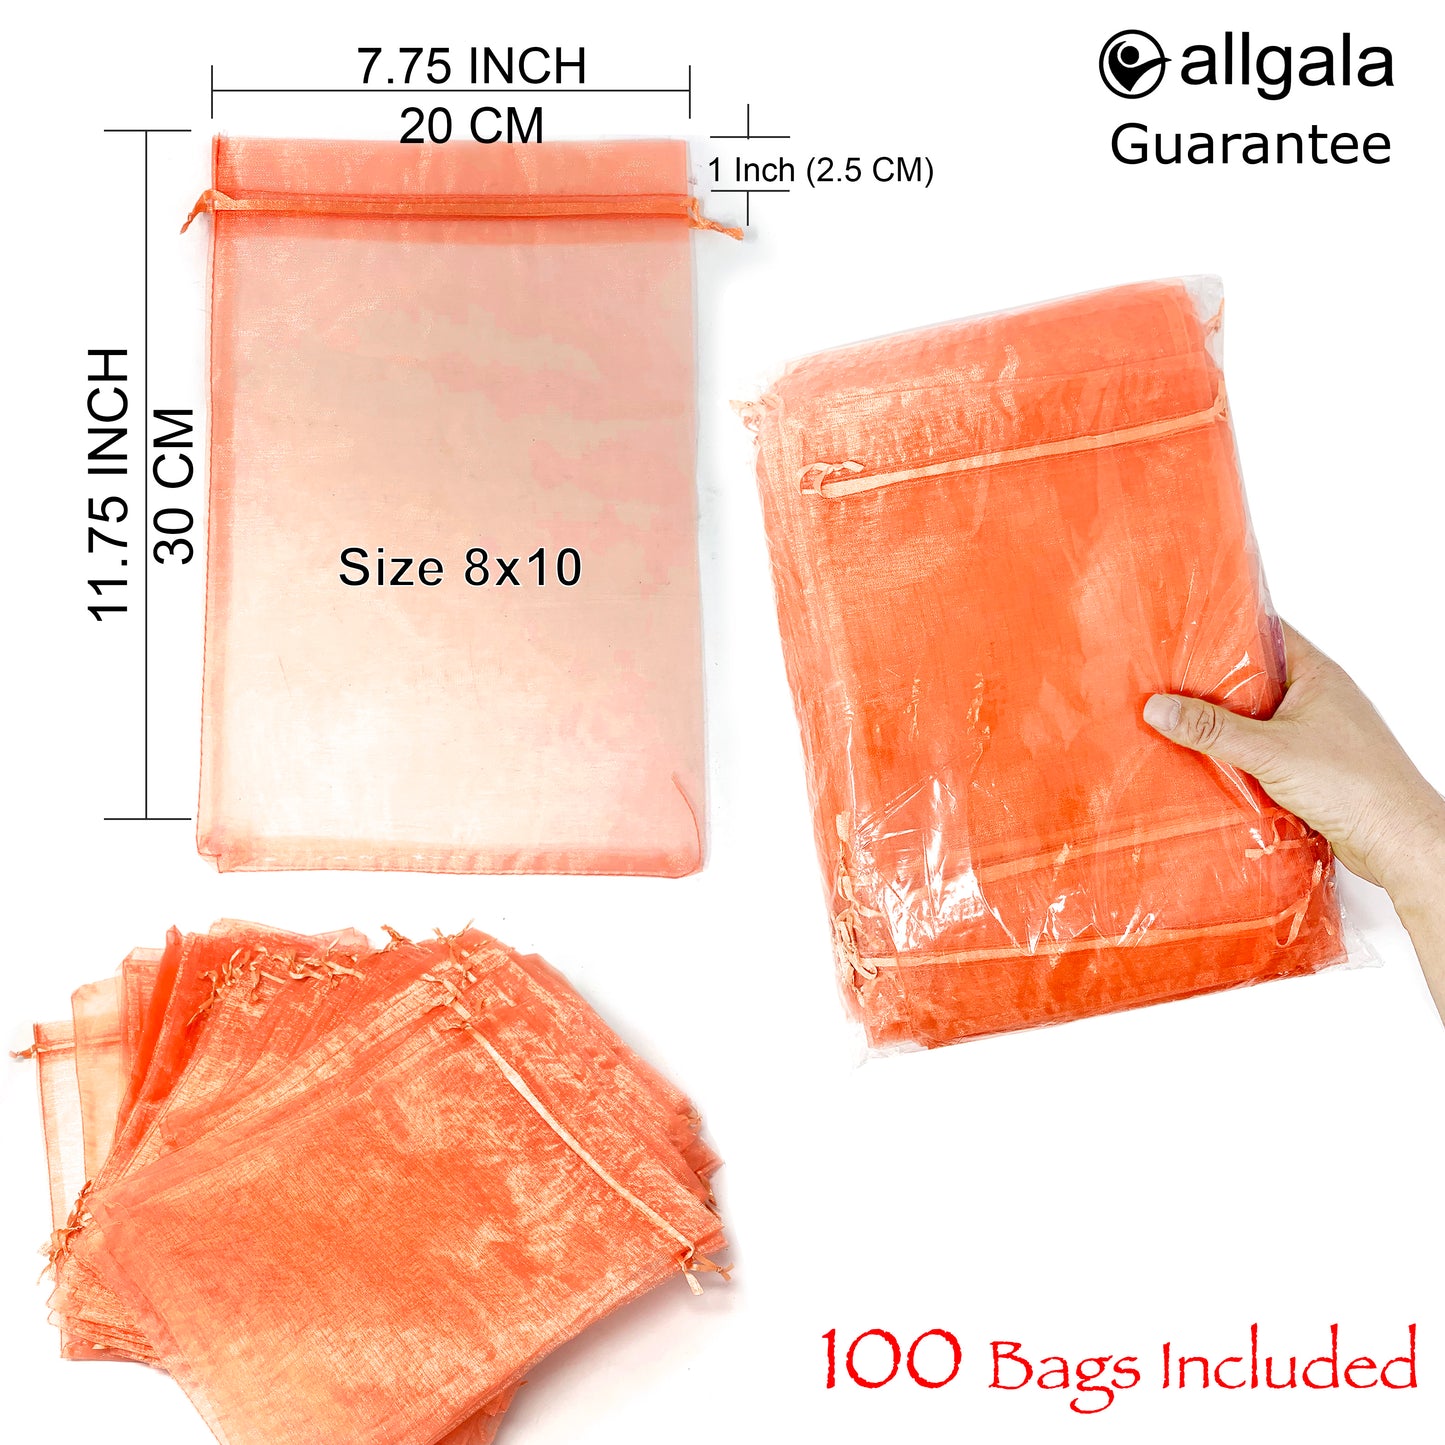 Allgala Organza Bags 100 Count Organza Sheer Gift Party Favor Bags with Drawstring-8x12 Inch